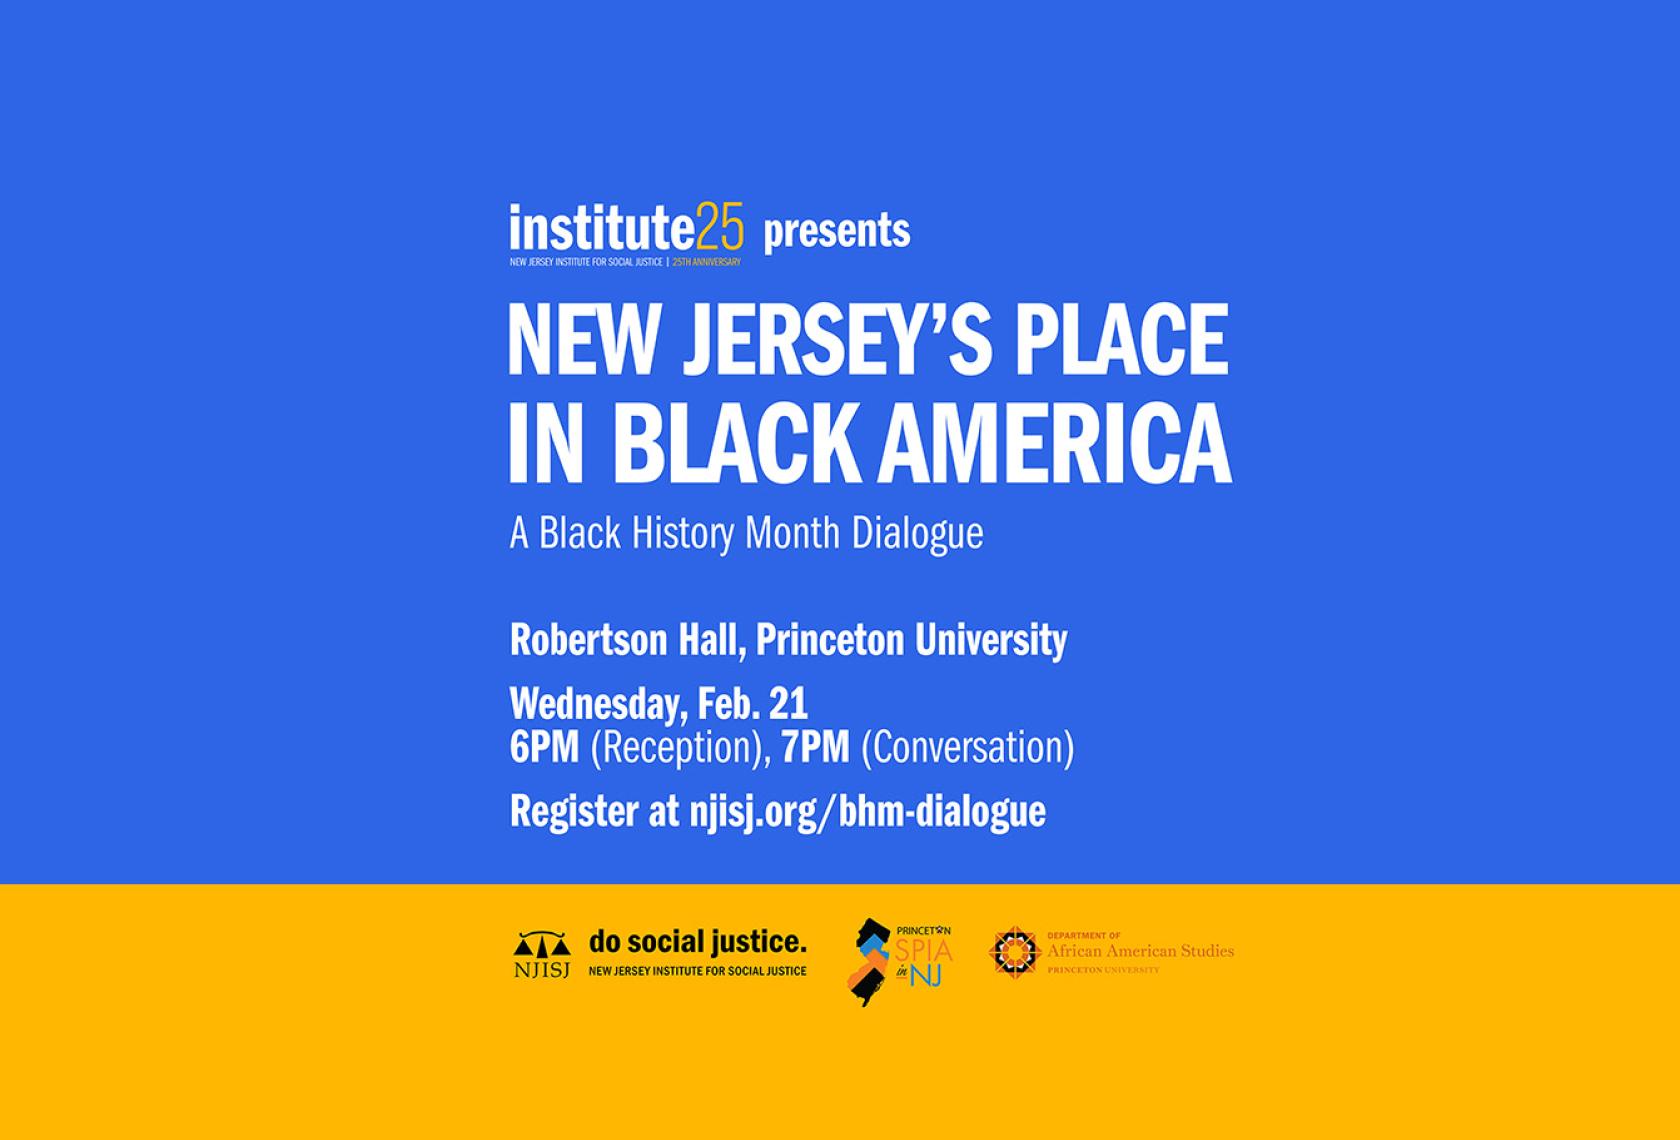 NJ's Place in Black America event flyer